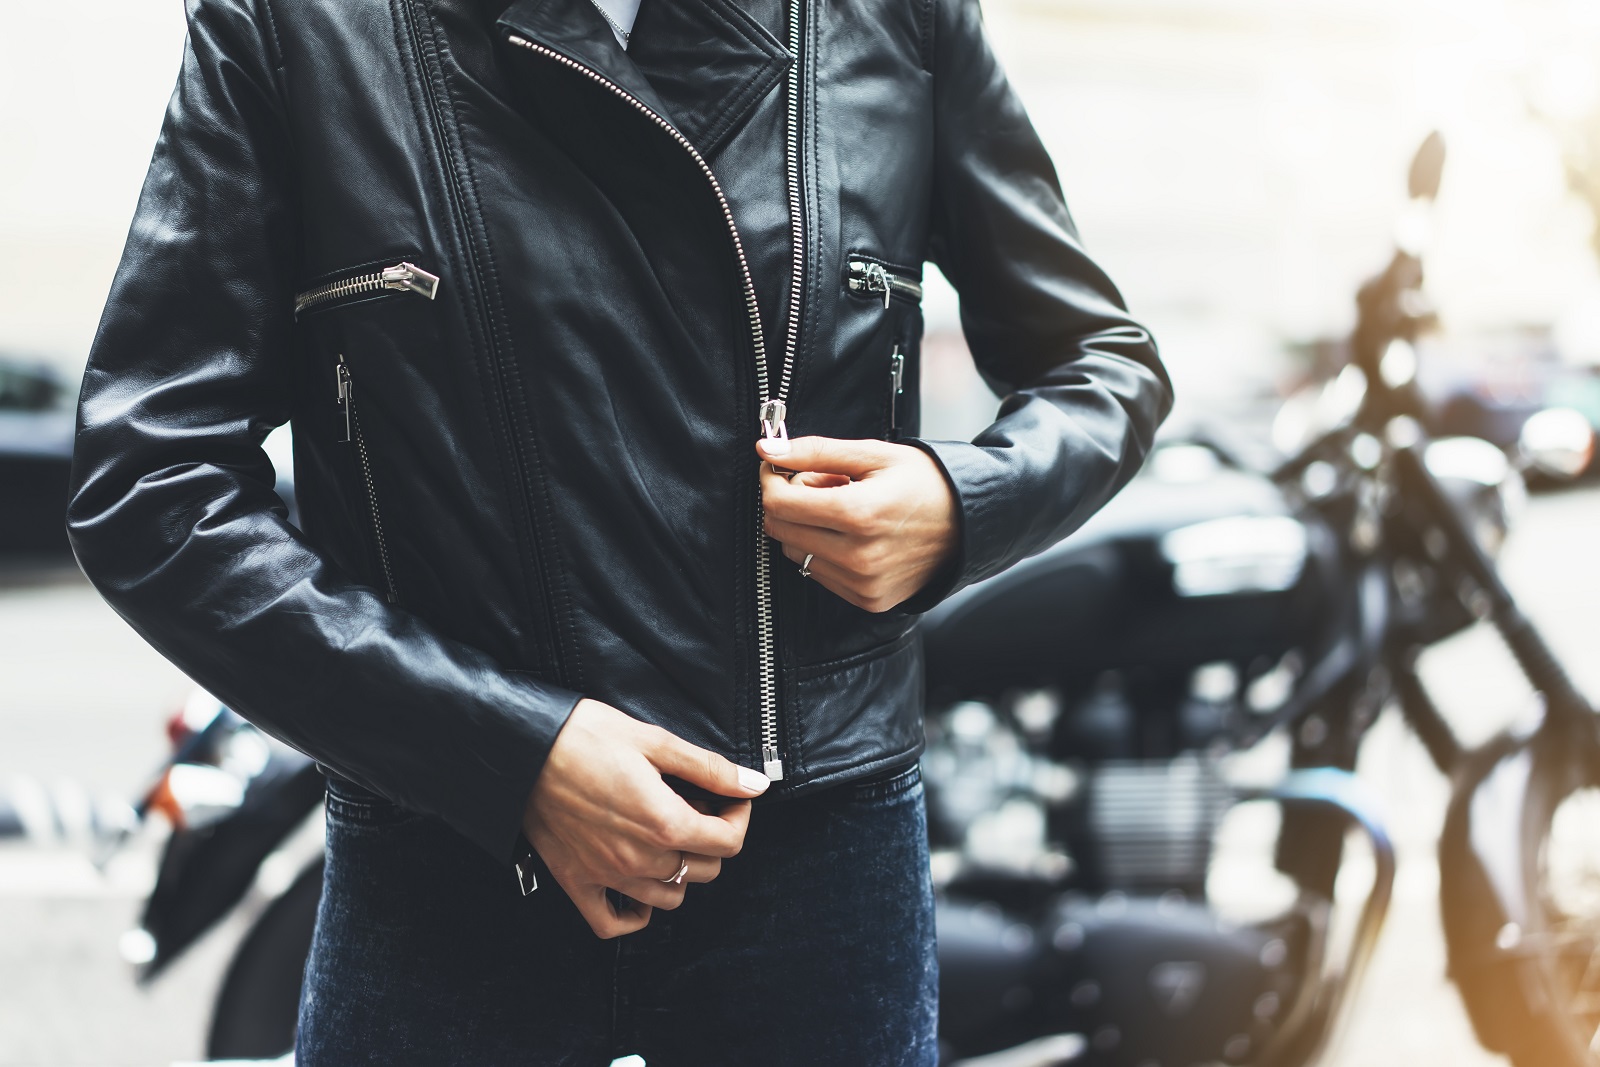 <p class="wp-caption-text">Image Credit: Shutterstock / A_B_C</p>  <p><span>A good motorcycle jacket provides protection and comfort. Look for one with armor in the shoulders, elbows, and back, made from durable materials like leather or textile.</span></p>